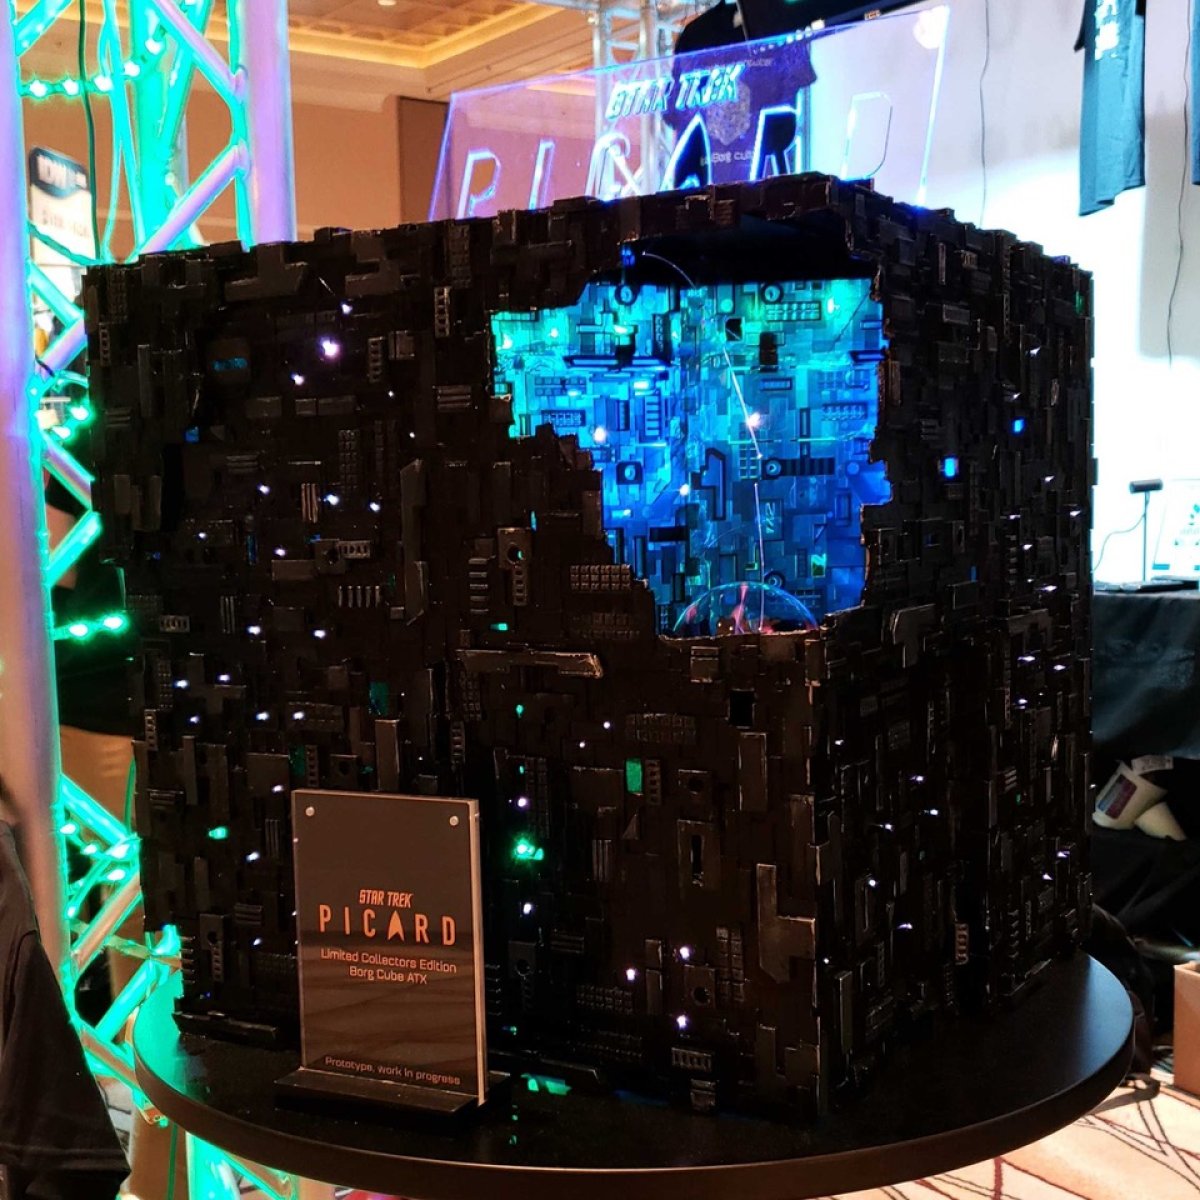 The first prototype of CherryTree's Star Trek: Picard Borg Cube ATX PC unveiled at STLV 2019